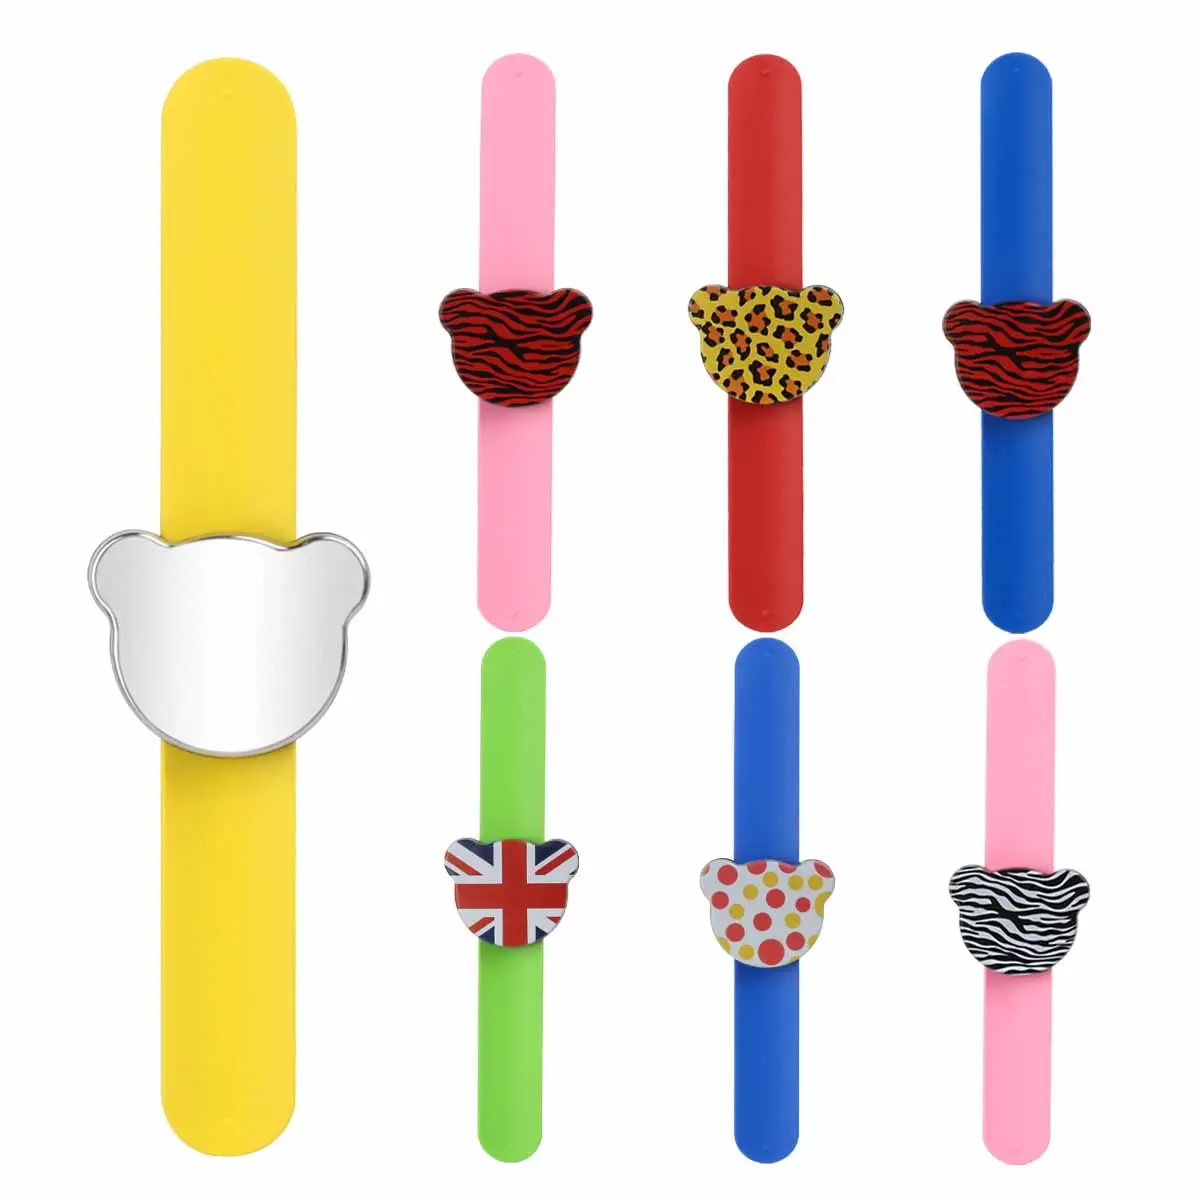 Magnetic Silicone Bracelet Hair Suction Needle Strap Styling Hair Clip Magnetic Racket Little Bear Magnetic Wrist Strap